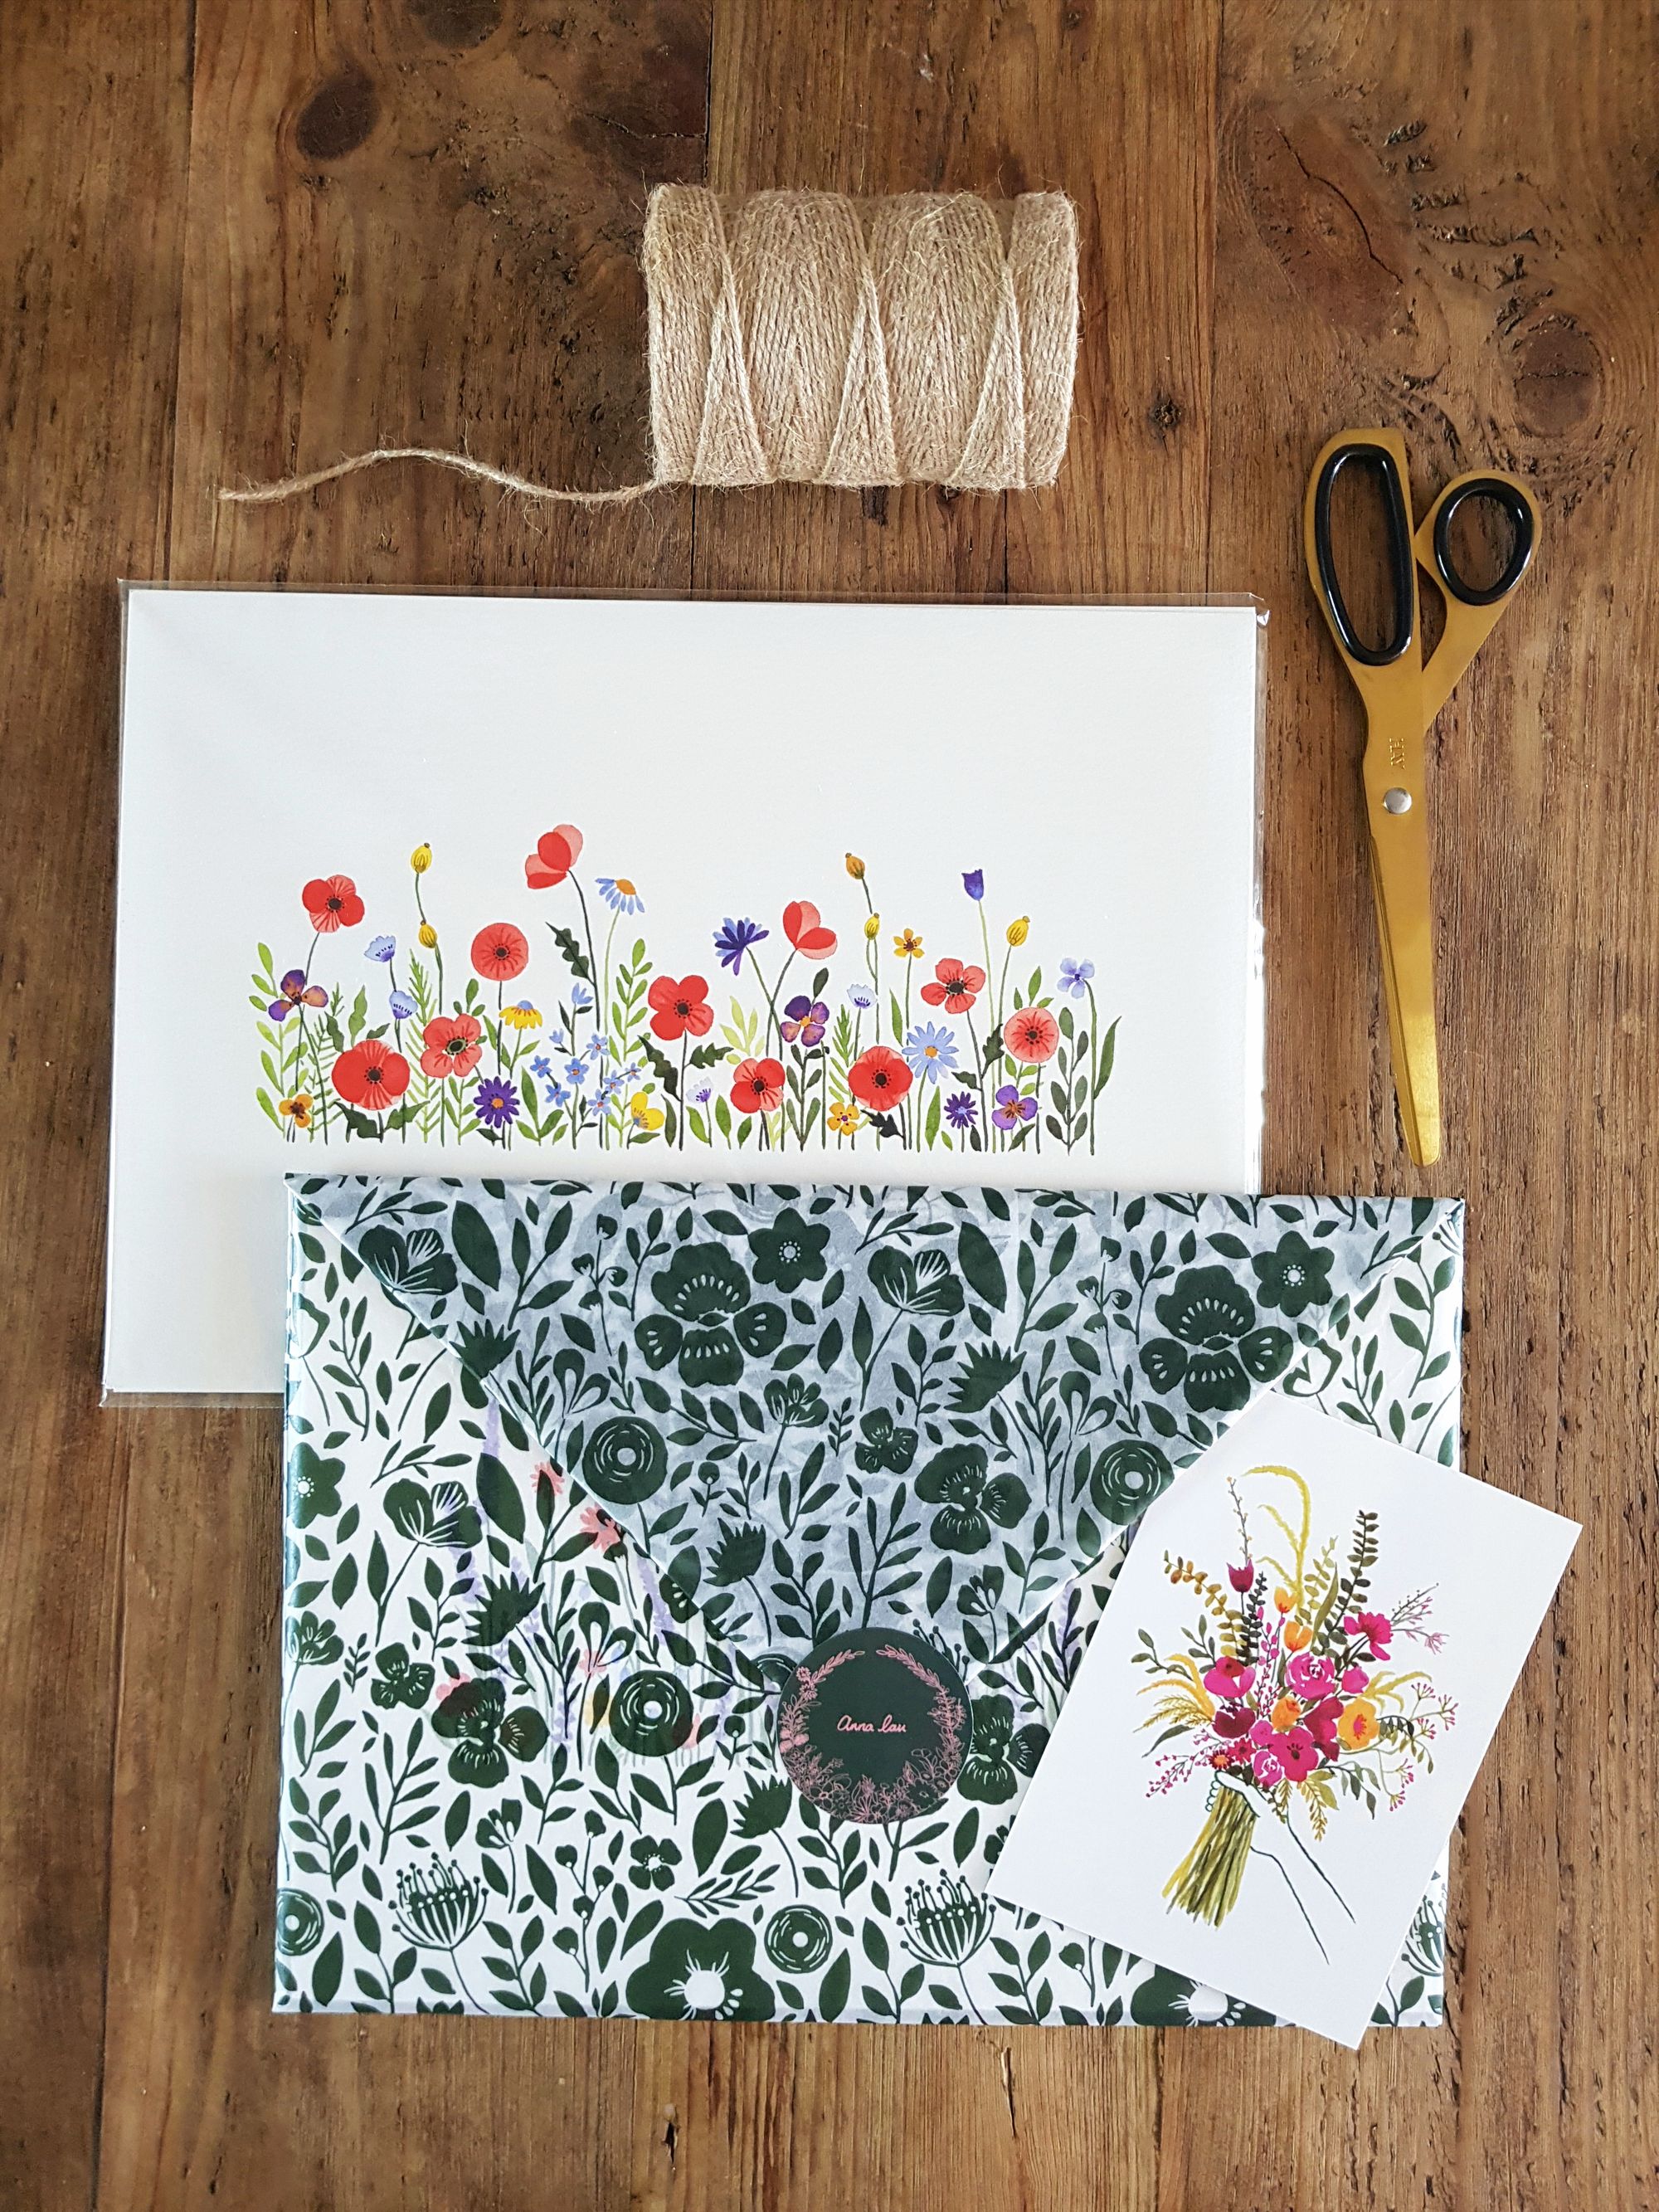 Daydreams and Watercolour Flowers with Anna Lau